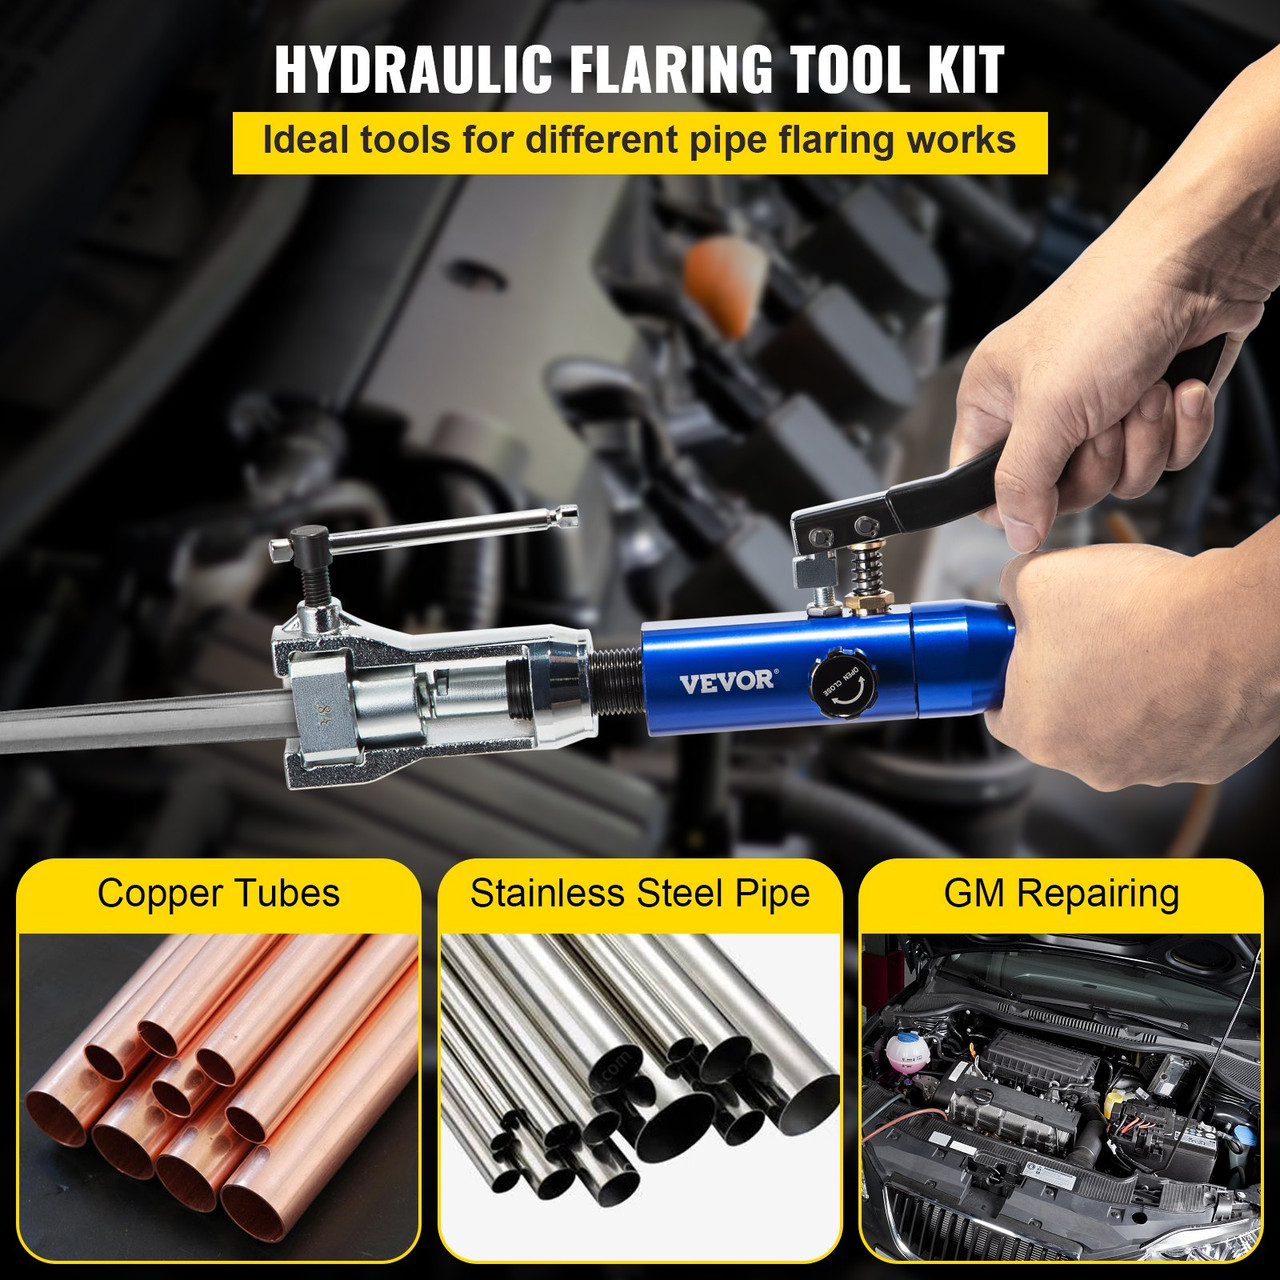 Hydraulic Flaring Tool Kit, 45ø Double Flaring Tool, Brake Repair Brake Flaring Tools for 3/16"-1/2", Brake Flare Tool with Tube Cutter and Deburrer, 32 PCS Tube Flaring Tools for Copper Lines